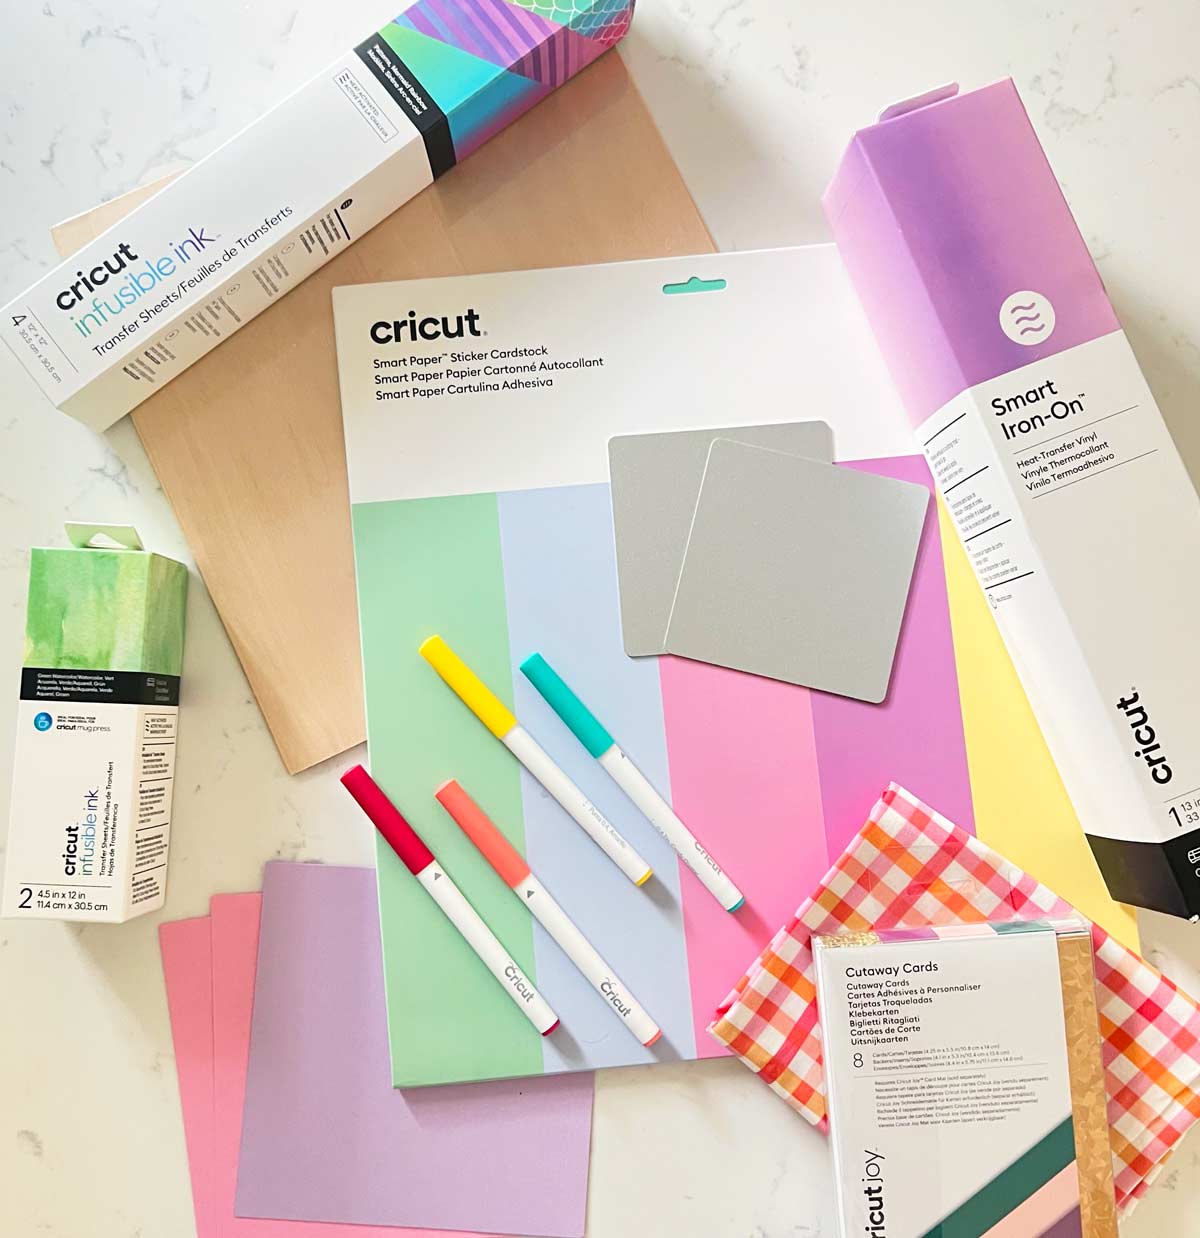 What materials can you use with Cricut?